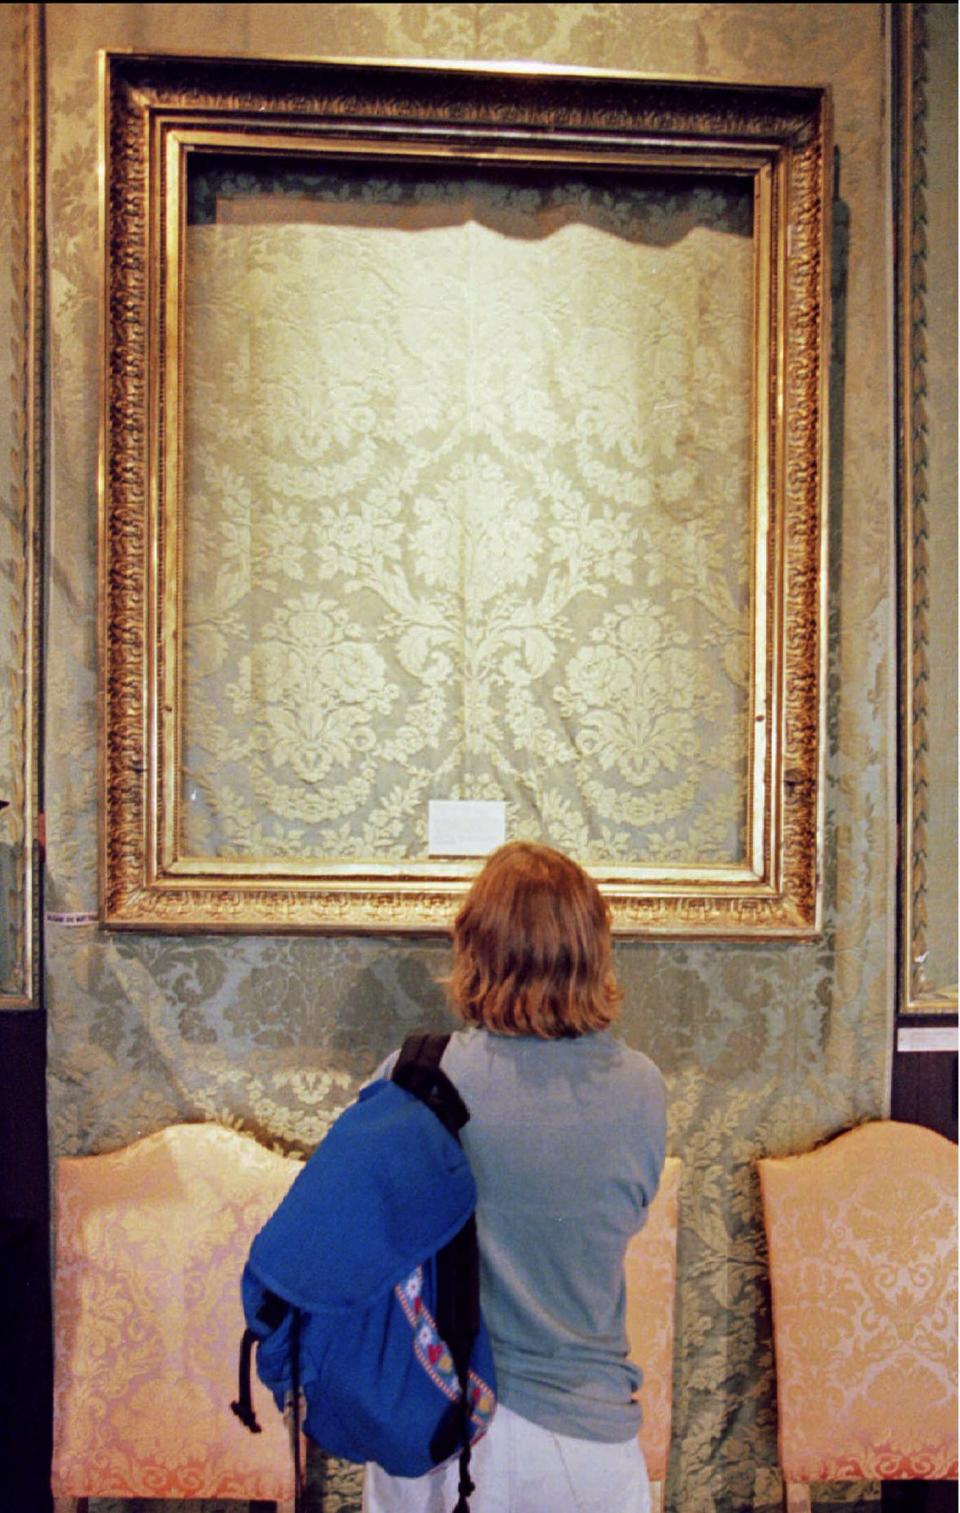 A visitor looks at the frame that held Rembrandt Van Rijn's painting "Lady and Gentleman in Black" at the Isabella Stewart Gardner Museum in Boston in this file photo taken August 29, 1990. The painting was one of 13 artworks stolen from the museum March 18, 1990 in one of the largest art heists ever. Twenty-five years have passed since 13 artworks worth $500 million were stolen from Boston's Isabella Stewart Gardner Museum and the costliest art theft in U.S. history remains unsolved. To match story USA-BOSTON/GARDNER REUTERS/Stringer/Files (UNITED STATES - Tags: CRIME LAW ENTERTAINMENT)